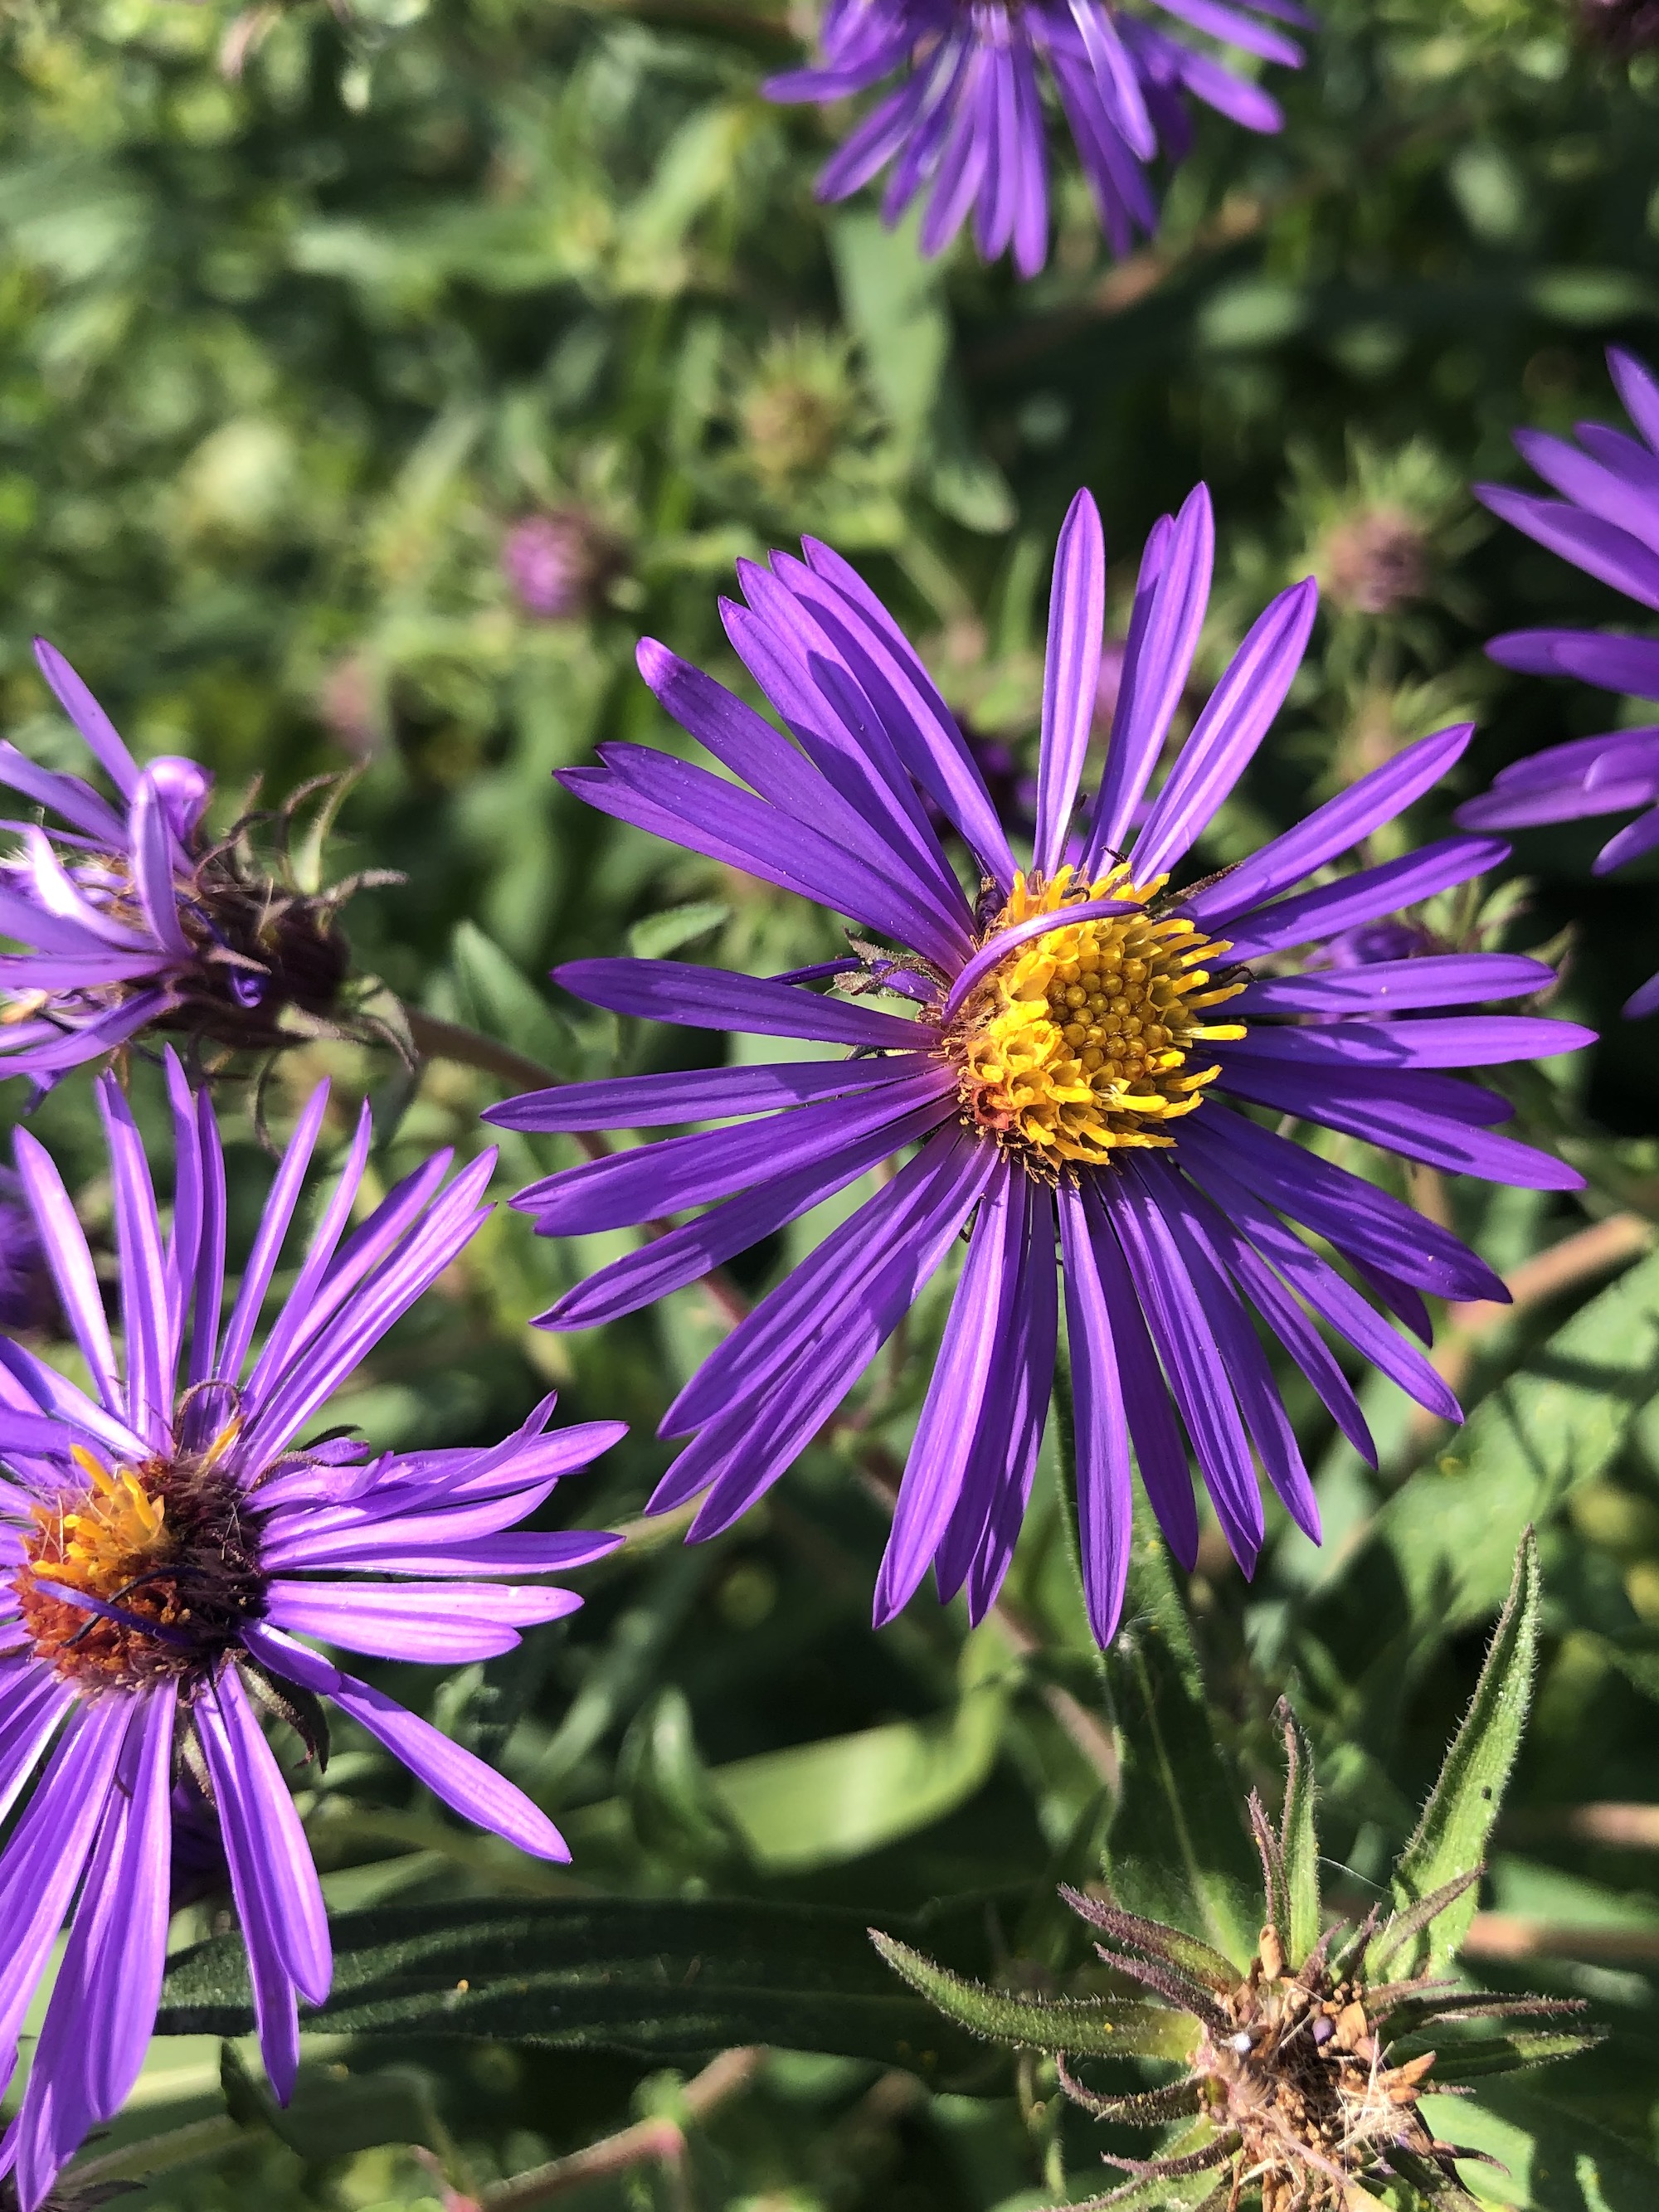 New England Aster on shore of Lake Wingra by Vilas Park in Madison, Wisconsin on September 19, 2021.